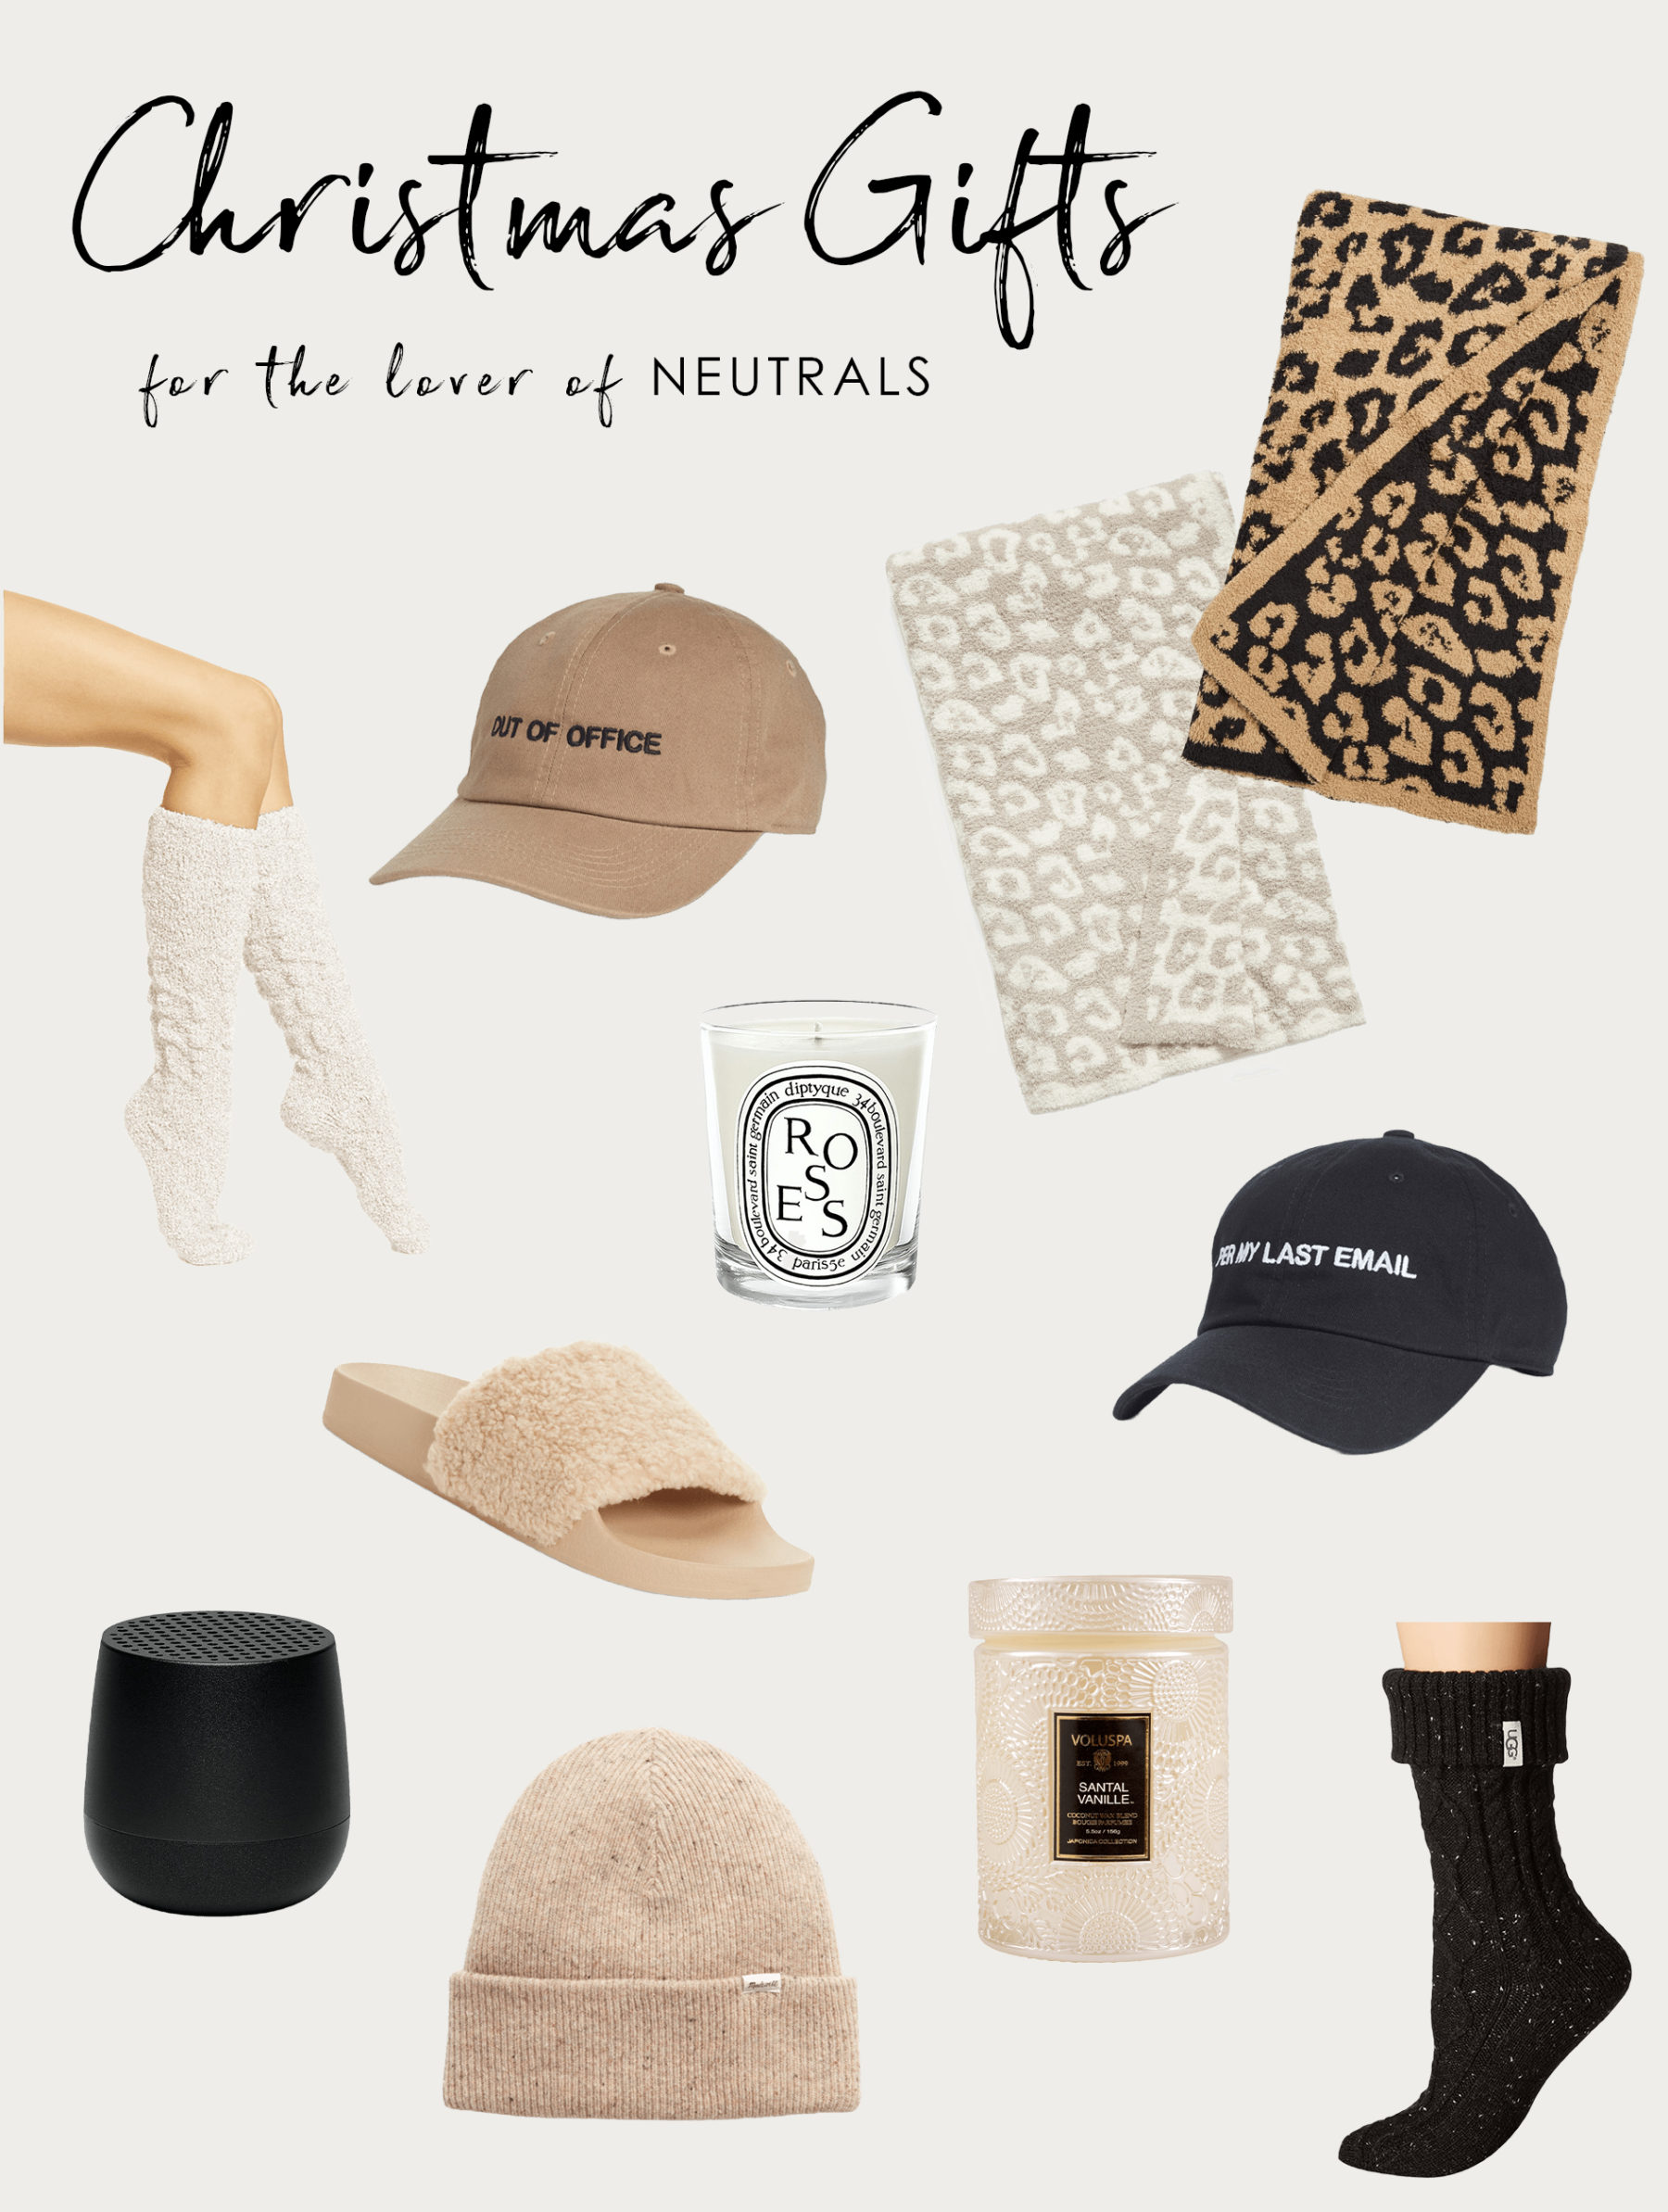 Christmas Gift Guide 2020 | For the Love of Neutrals | Blondie in the City by Hayley Larue